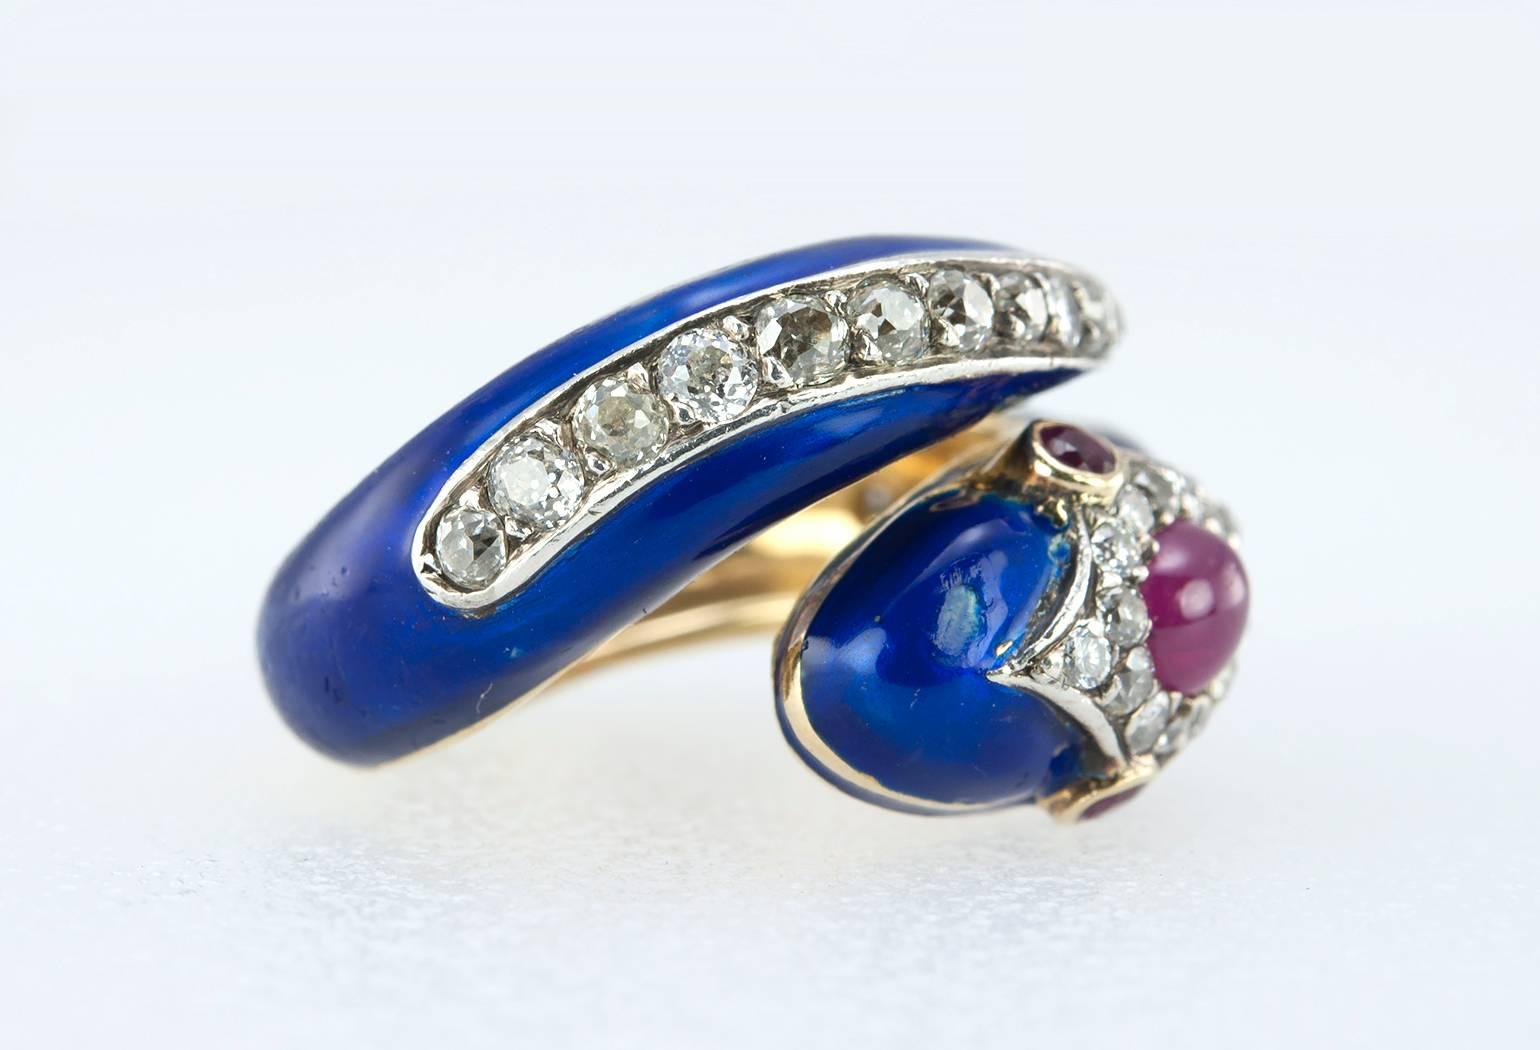 Enamel Snake Ring with Diamonds and Rubies  For Sale 2